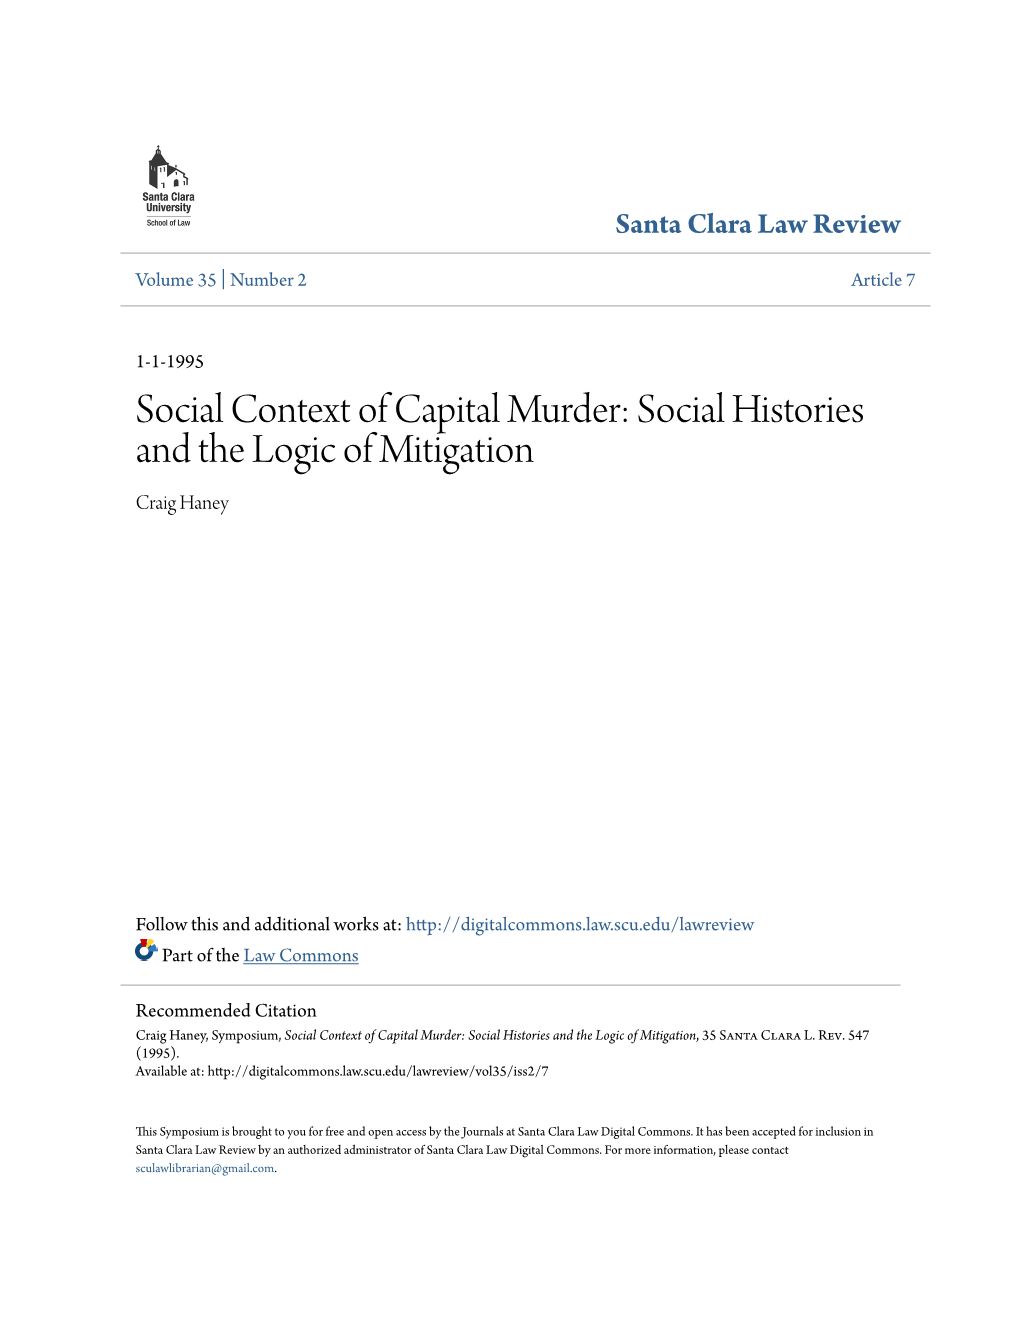 Social Context of Capital Murder: Social Histories and the Logic of Mitigation Craig Haney